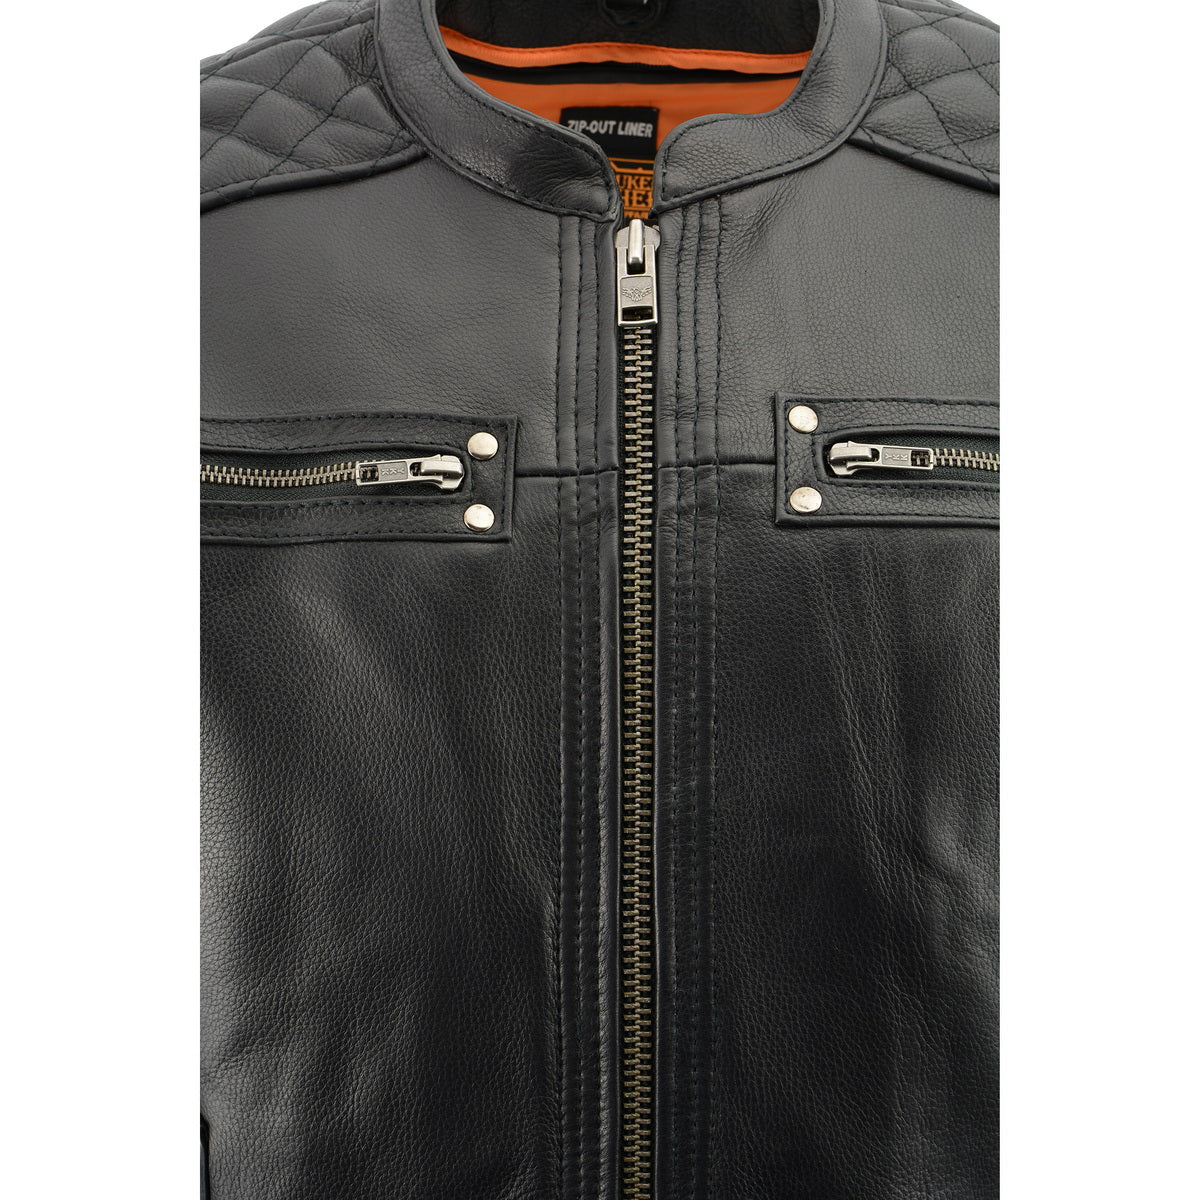 Milwaukee Leather MLM1580 Men's Full Side Lace Vented Black Leather Scooter Jacket